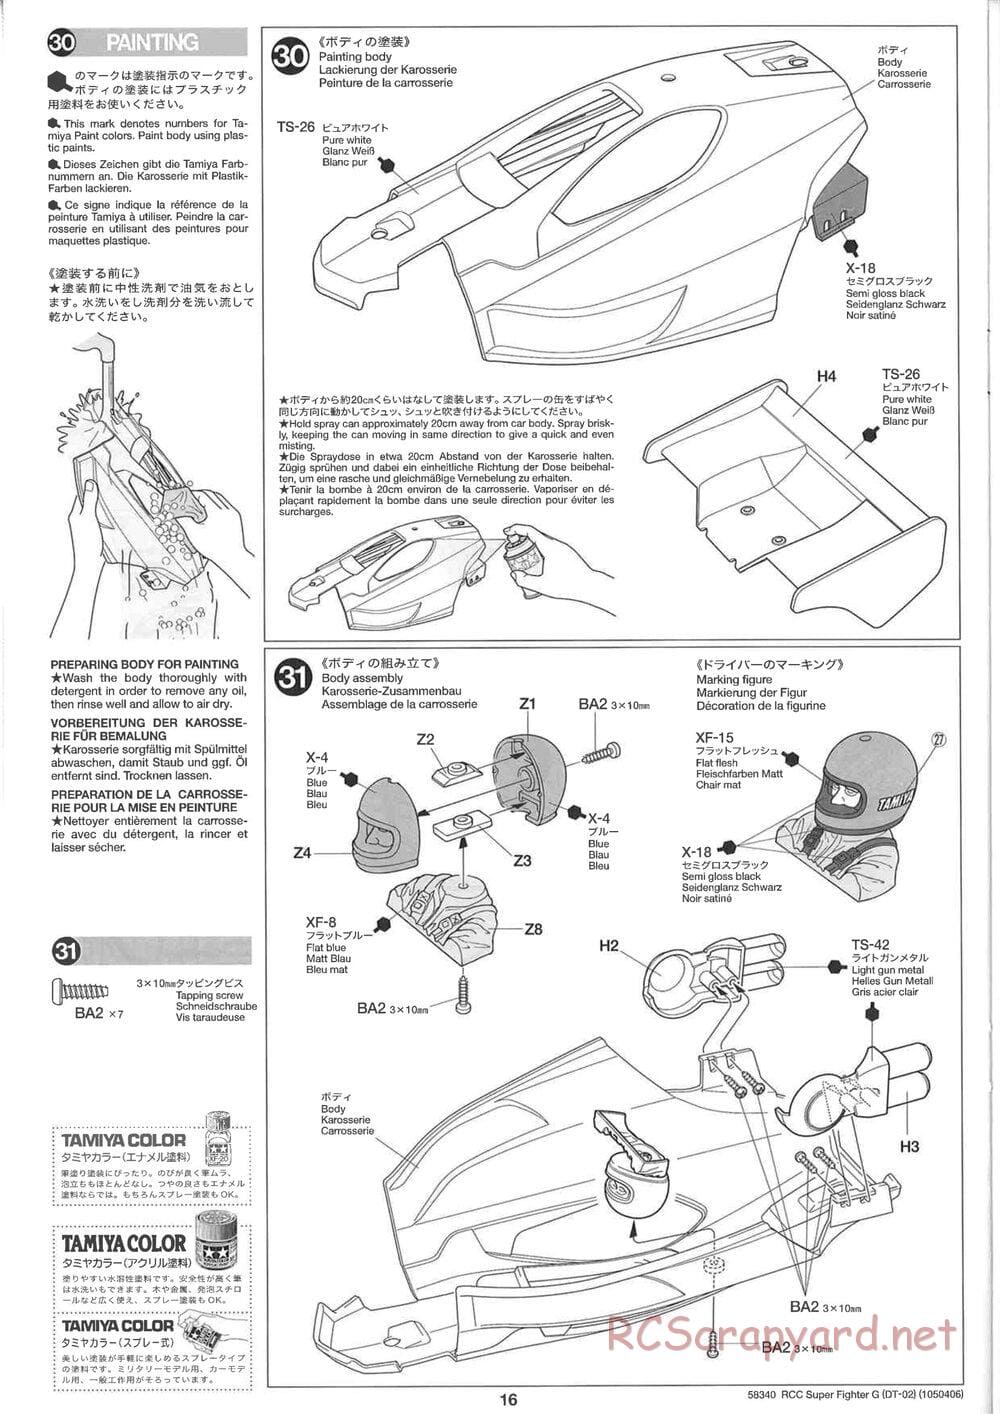 Tamiya - Super Fighter G Chassis - Manual - Page 16